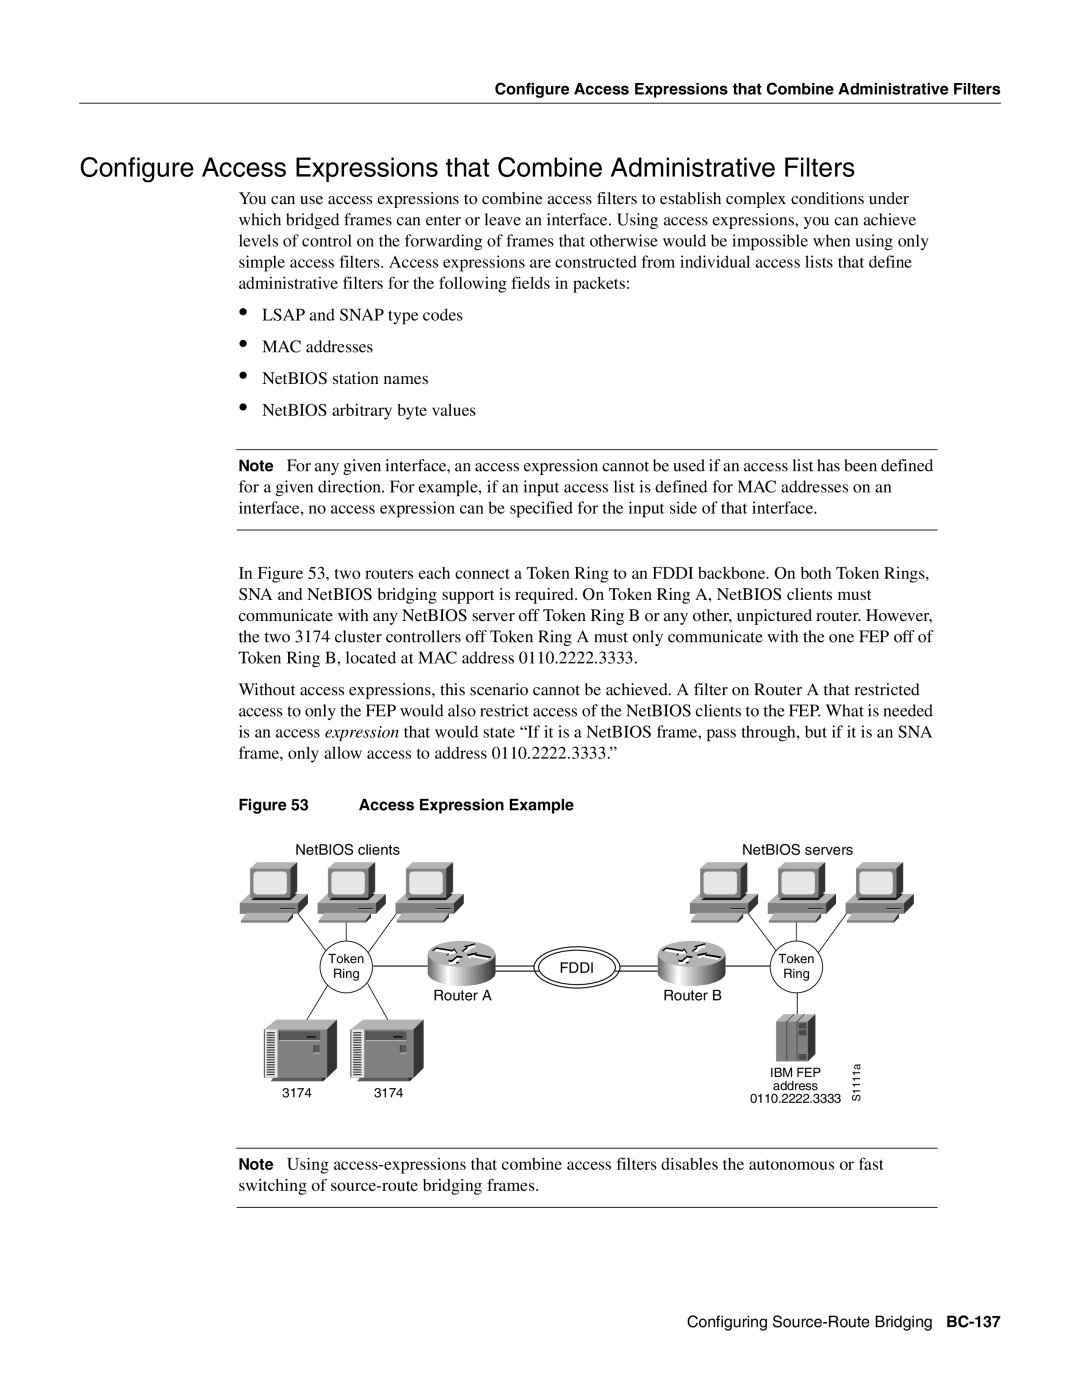 Cisco Systems BC-109 manual Configure Access Expressions that Combine Administrative Filters 